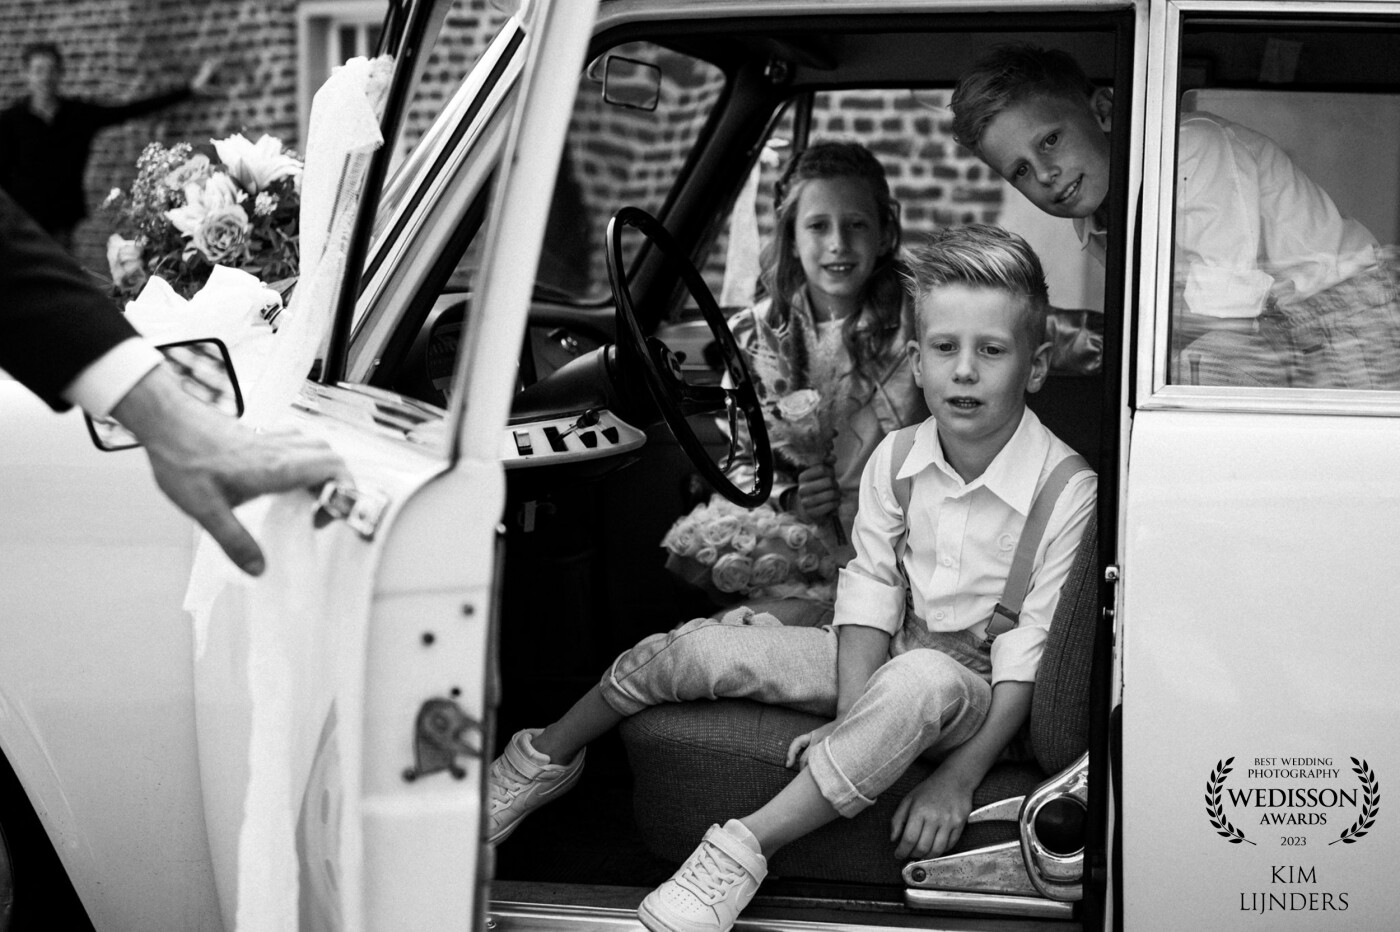 The groom opens the door for his children. But actually, they wont come out of the car. It’s too much fun in here!